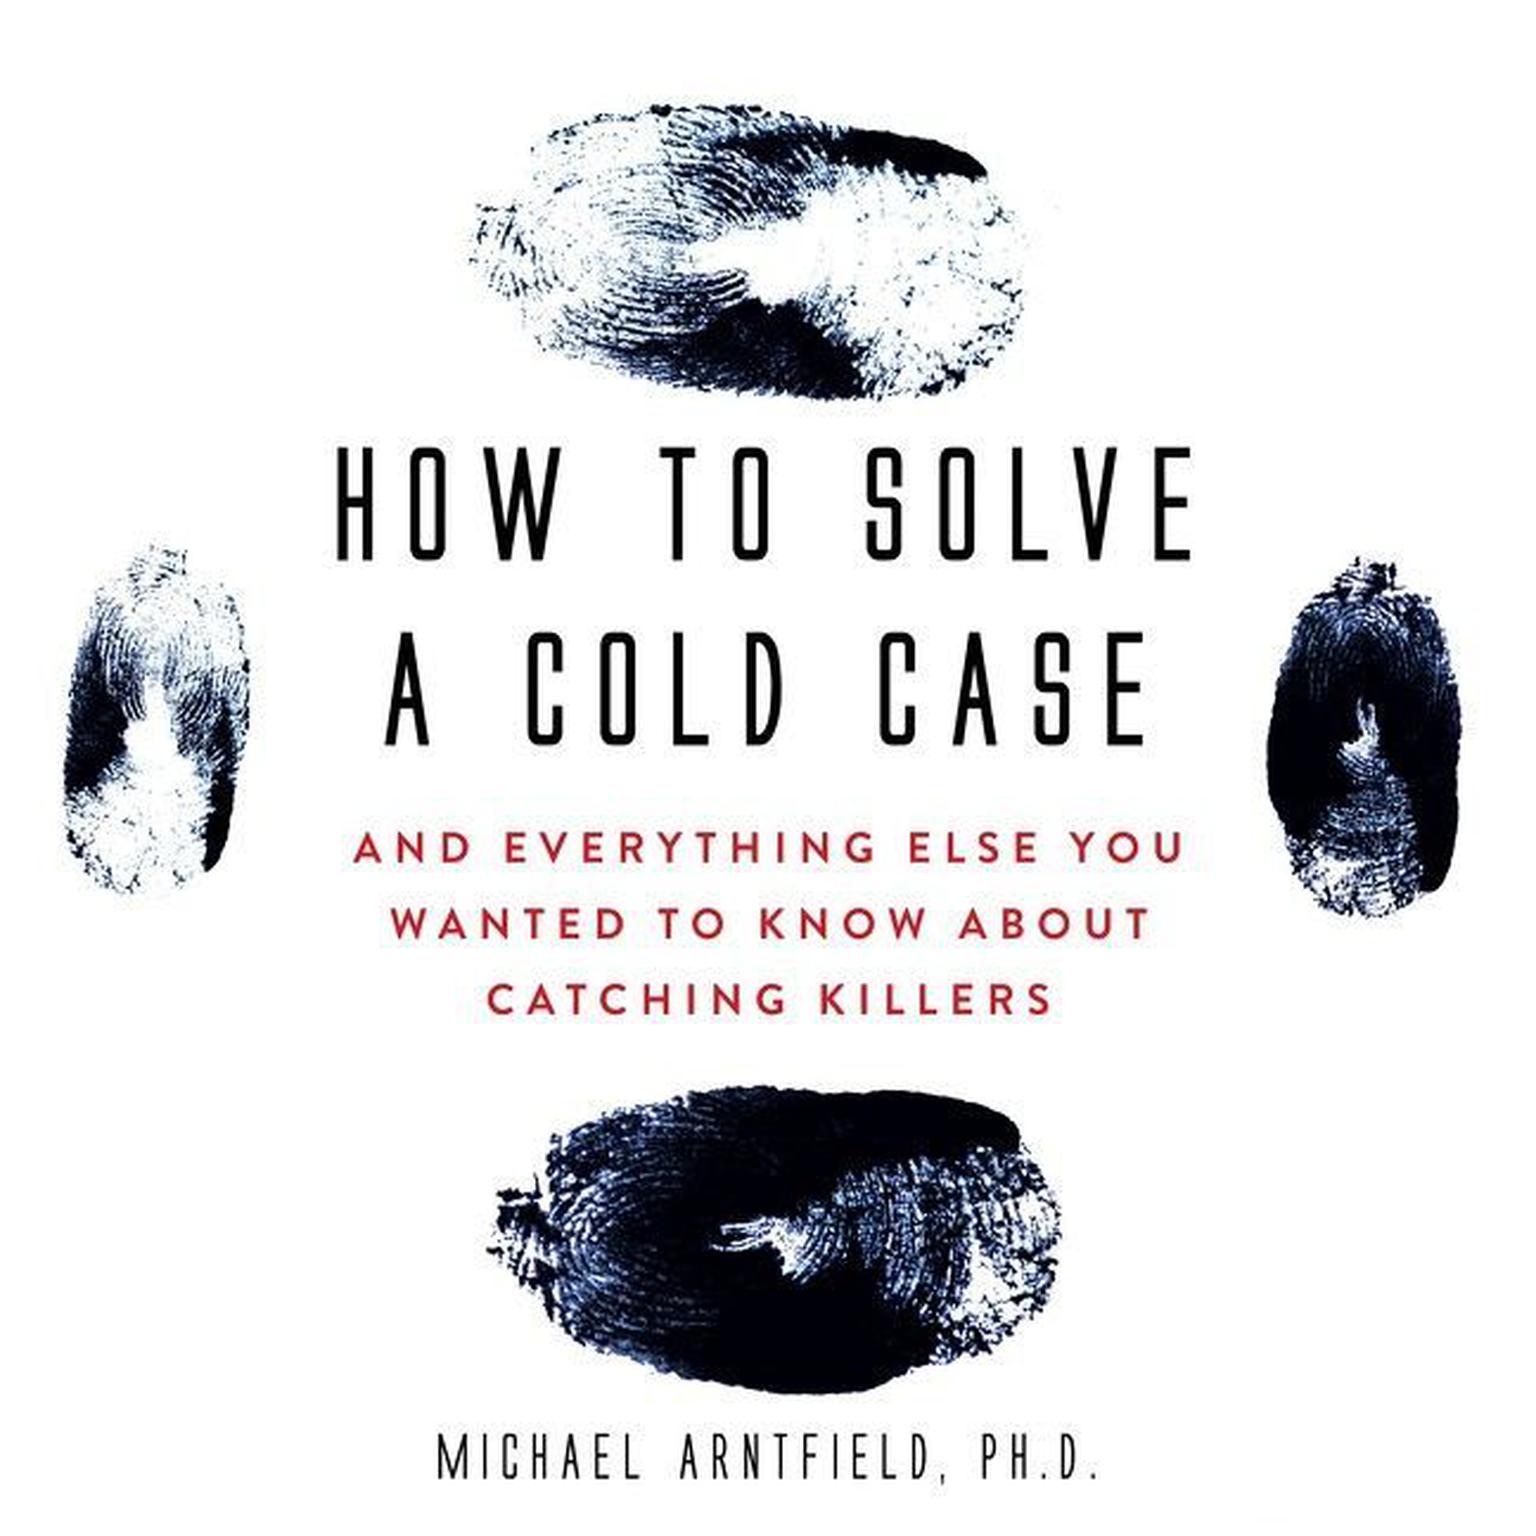 How to Solve a Cold Case: And Everything Else You Wanted To Know About Catching Killers Audiobook, by Michael Arntfield